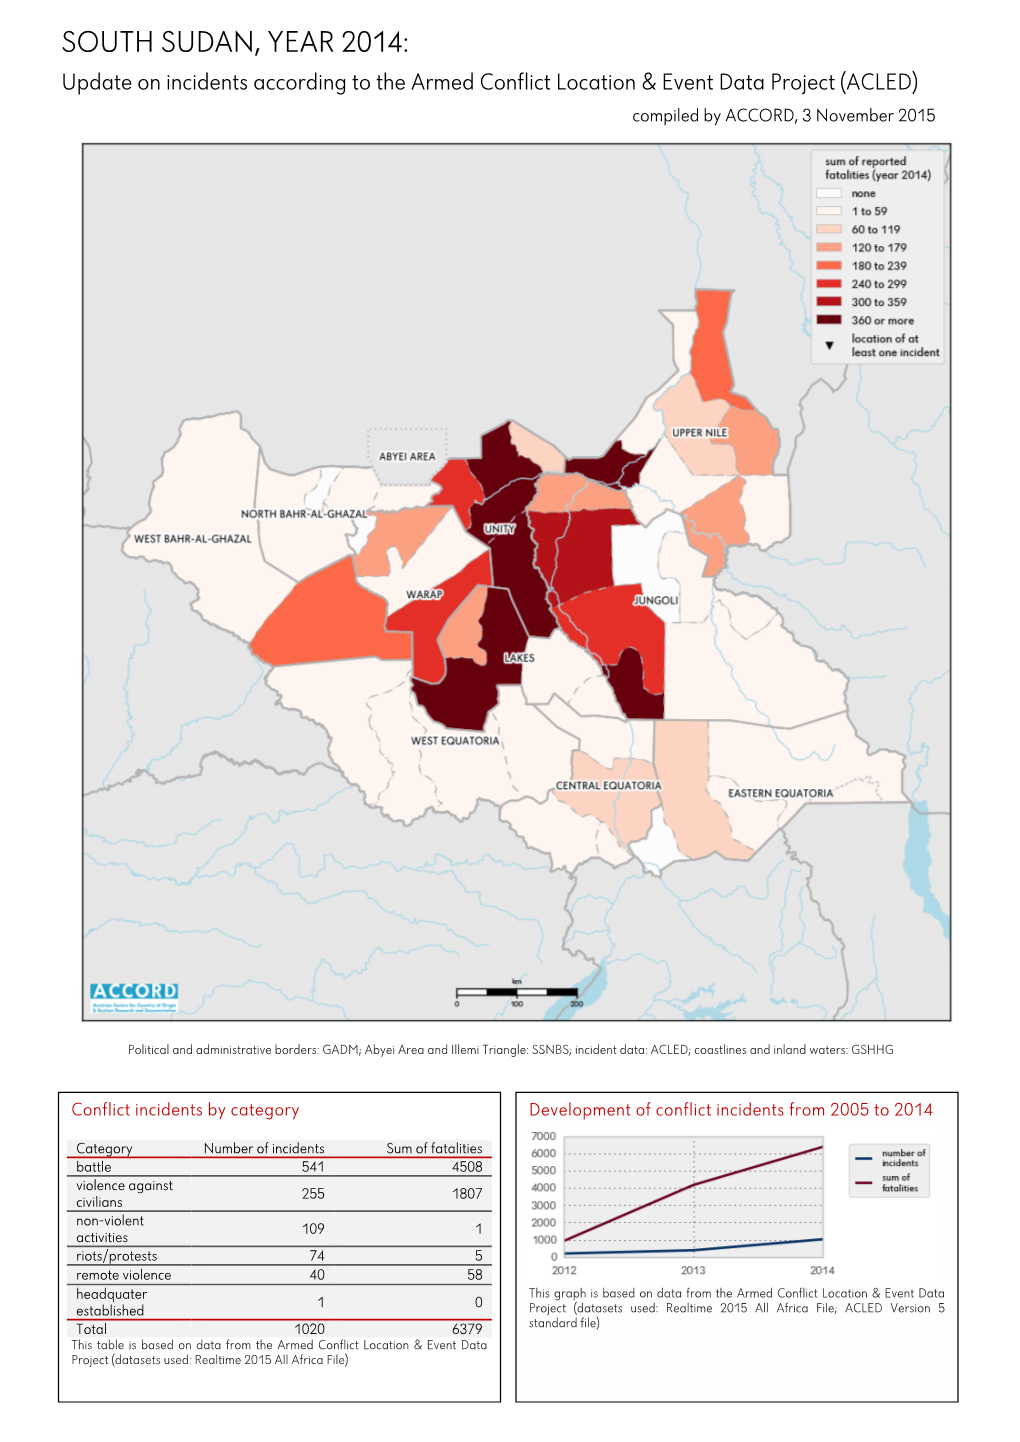 SOUTH SUDAN, YEAR 2014: Update on Incidents According to the Armed Conflict Location & Event Data Project (ACLED) Compiled by ACCORD, 3 November 2015